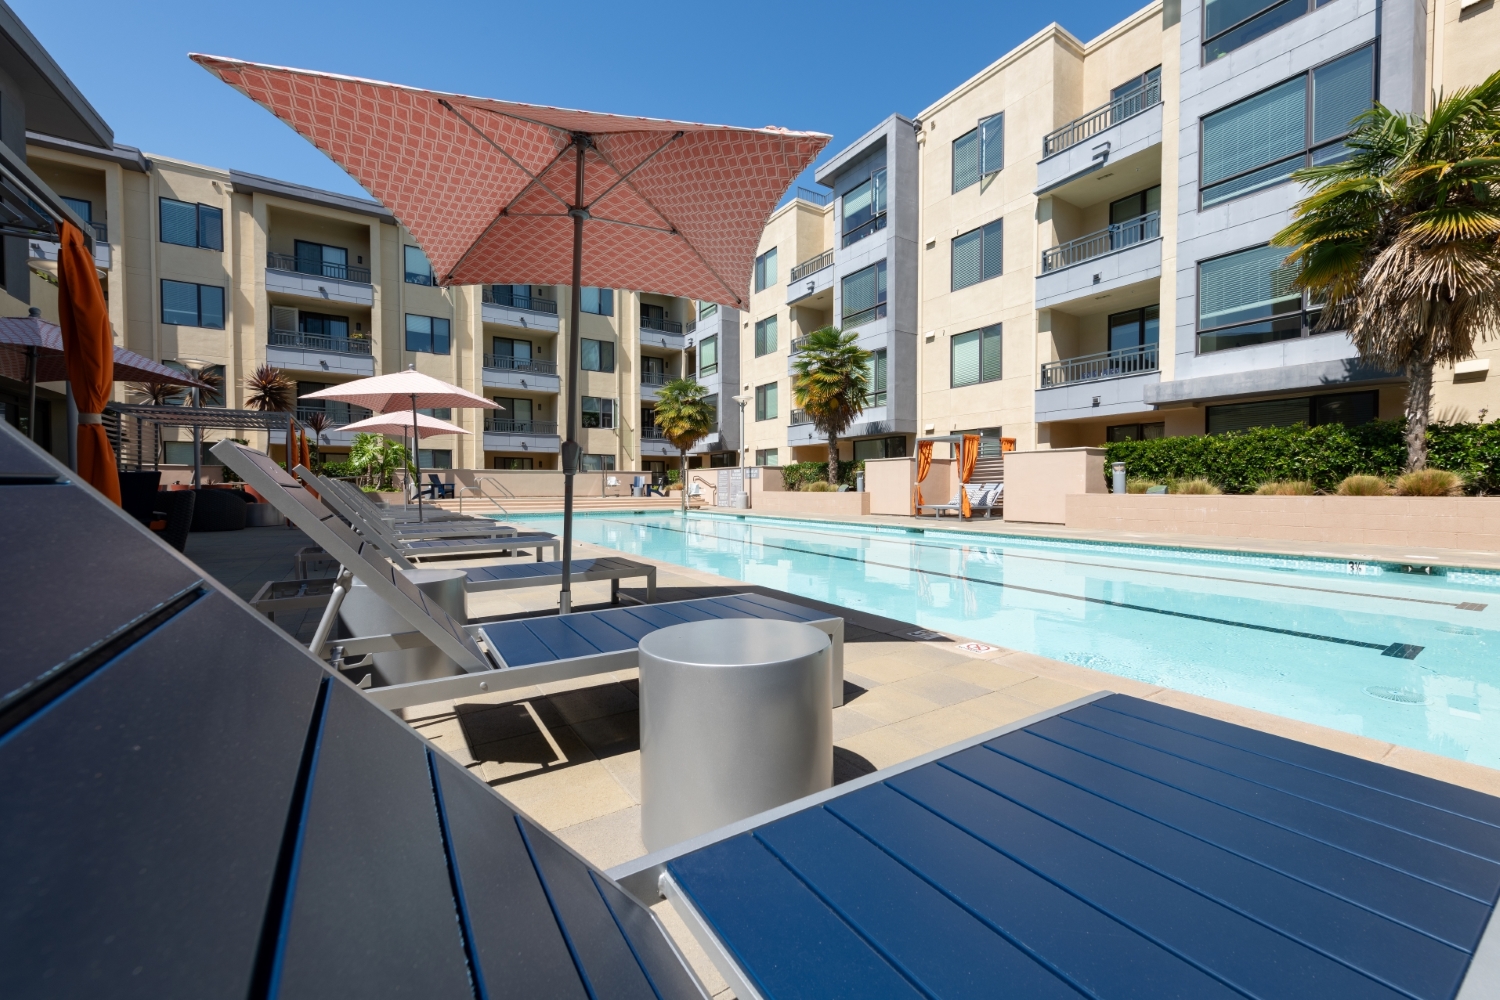 Apartments in Foster City-One Hundred Grand Swimming Pool Surrounded by Shaded Seating and Lounge Chairs